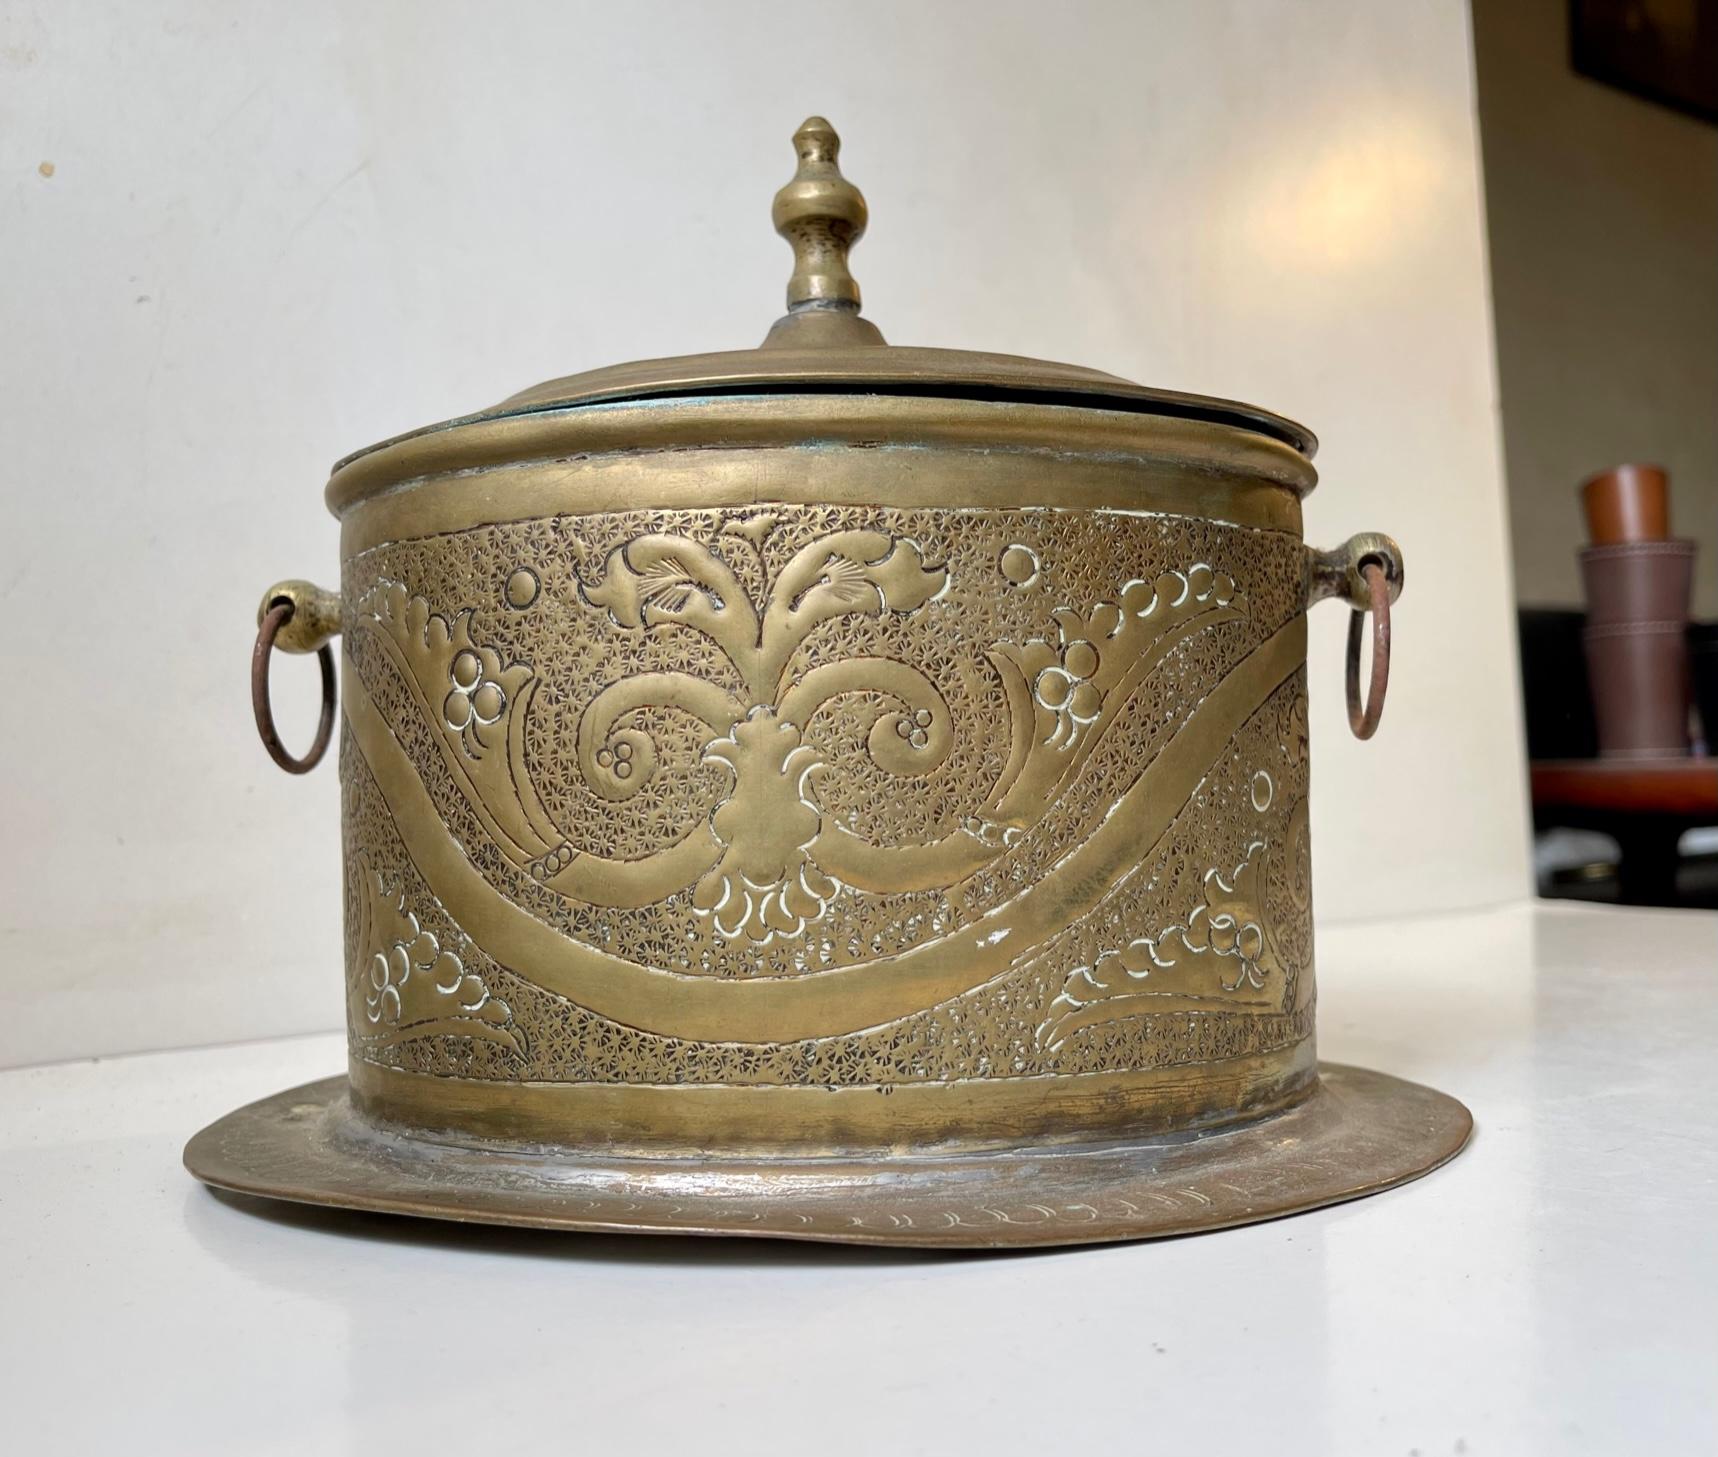 Late 19th or early 20th century Teacaddy in Hand engraved and embossed brass. Great rich patina that along with its details give it a certain charm. It has a hinged lid that works just fine. Unknown Moroccan makers mark present. Measurements: